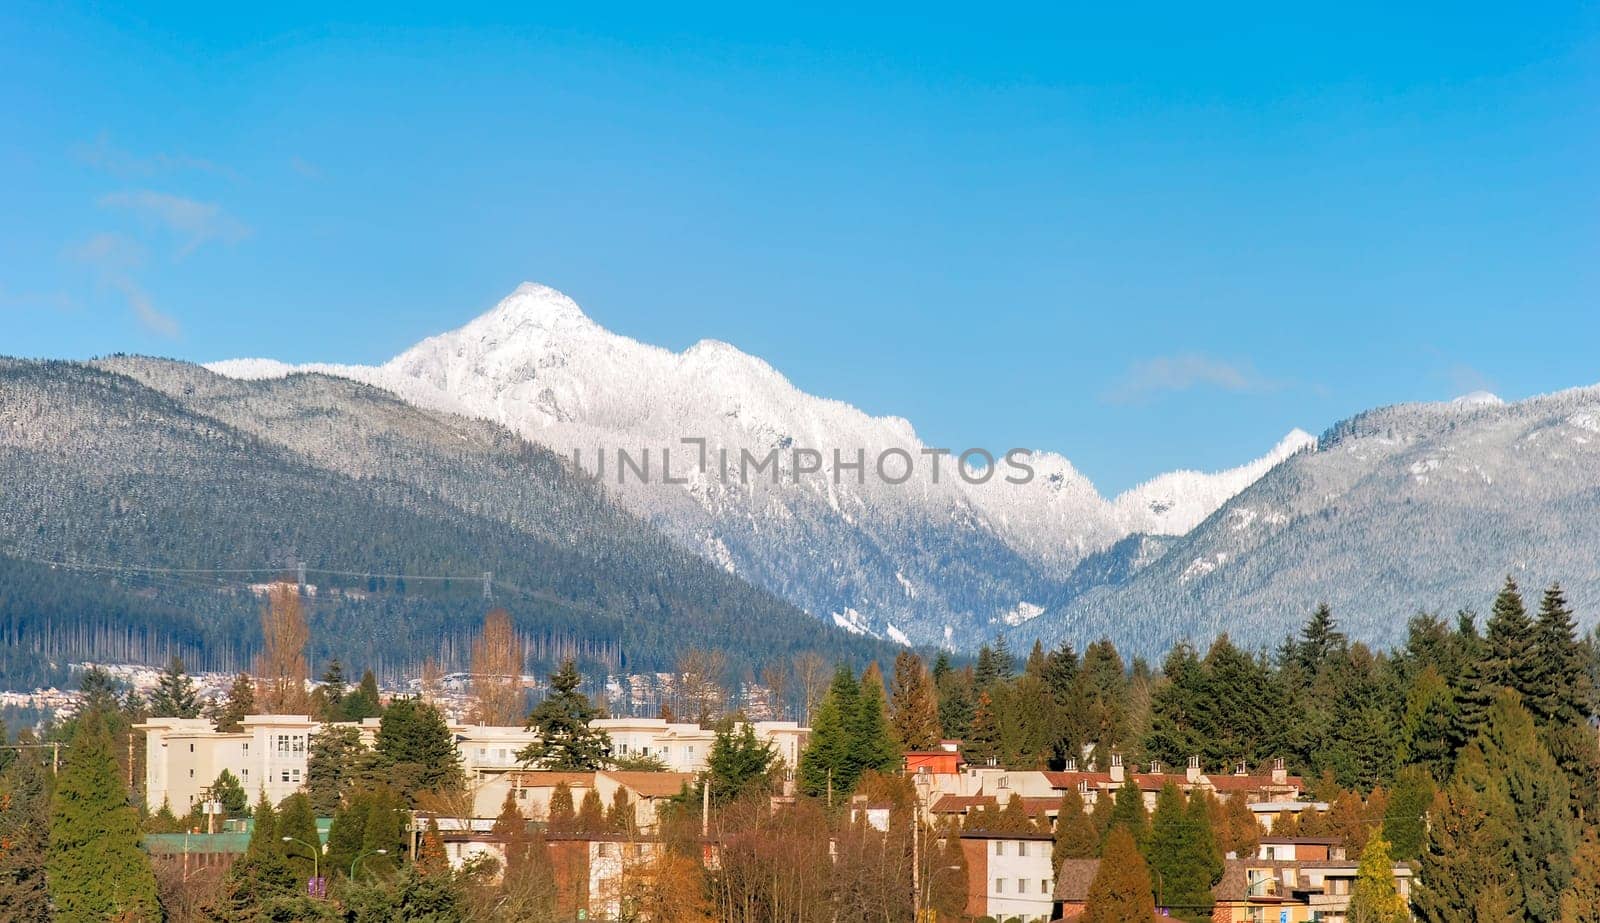 Overviewe of Burquitlam area of Grater Vancouver on brite winter day by Imagenet